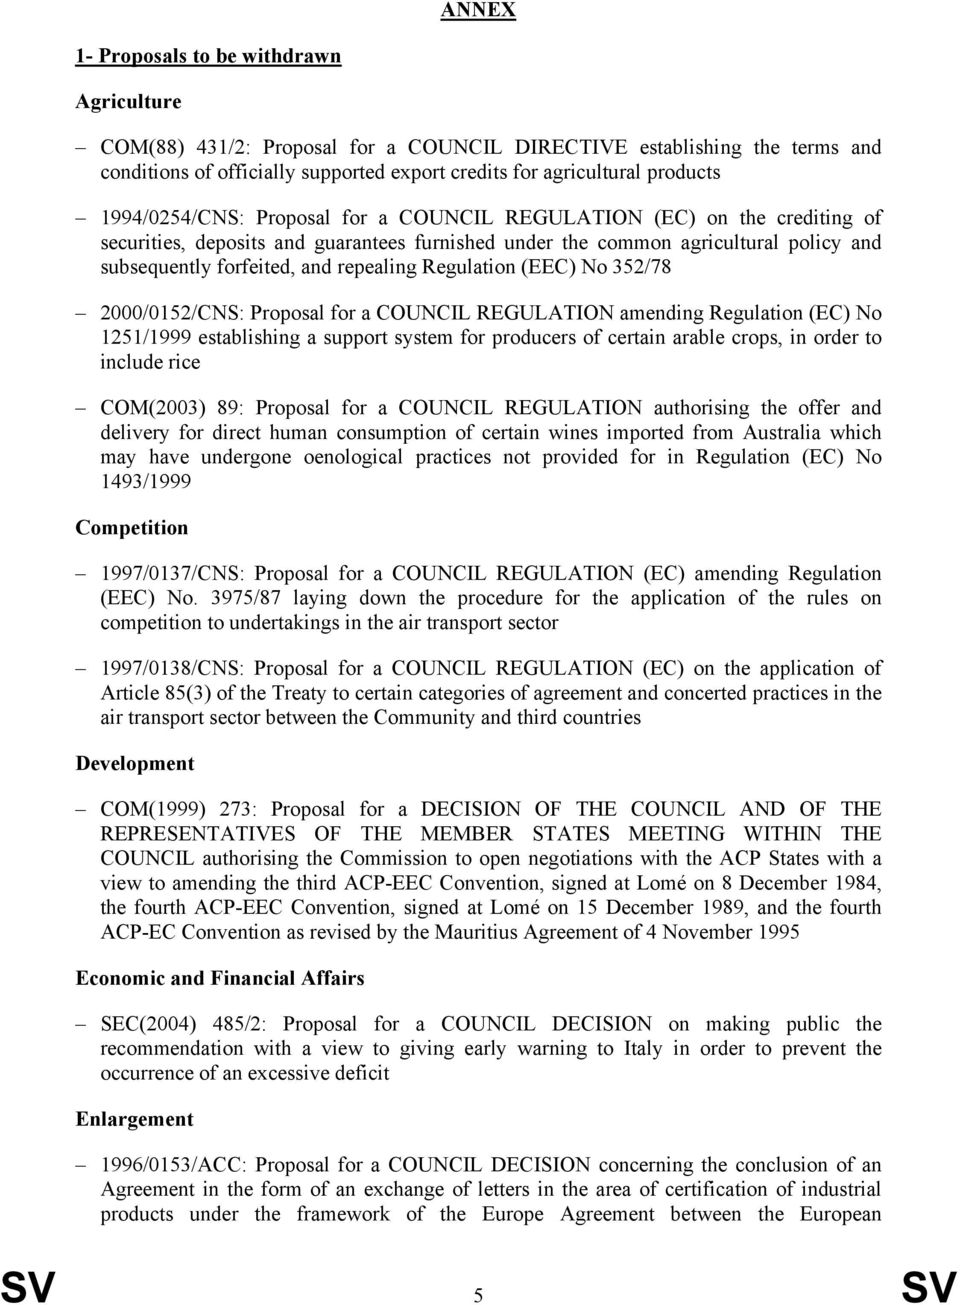 Regulation (EEC) No 352/78 2000/0152/CNS: Proposal for a COUNCIL REGULATION amending Regulation (EC) No 1251/1999 establishing a support system for producers of certain arable crops, in order to